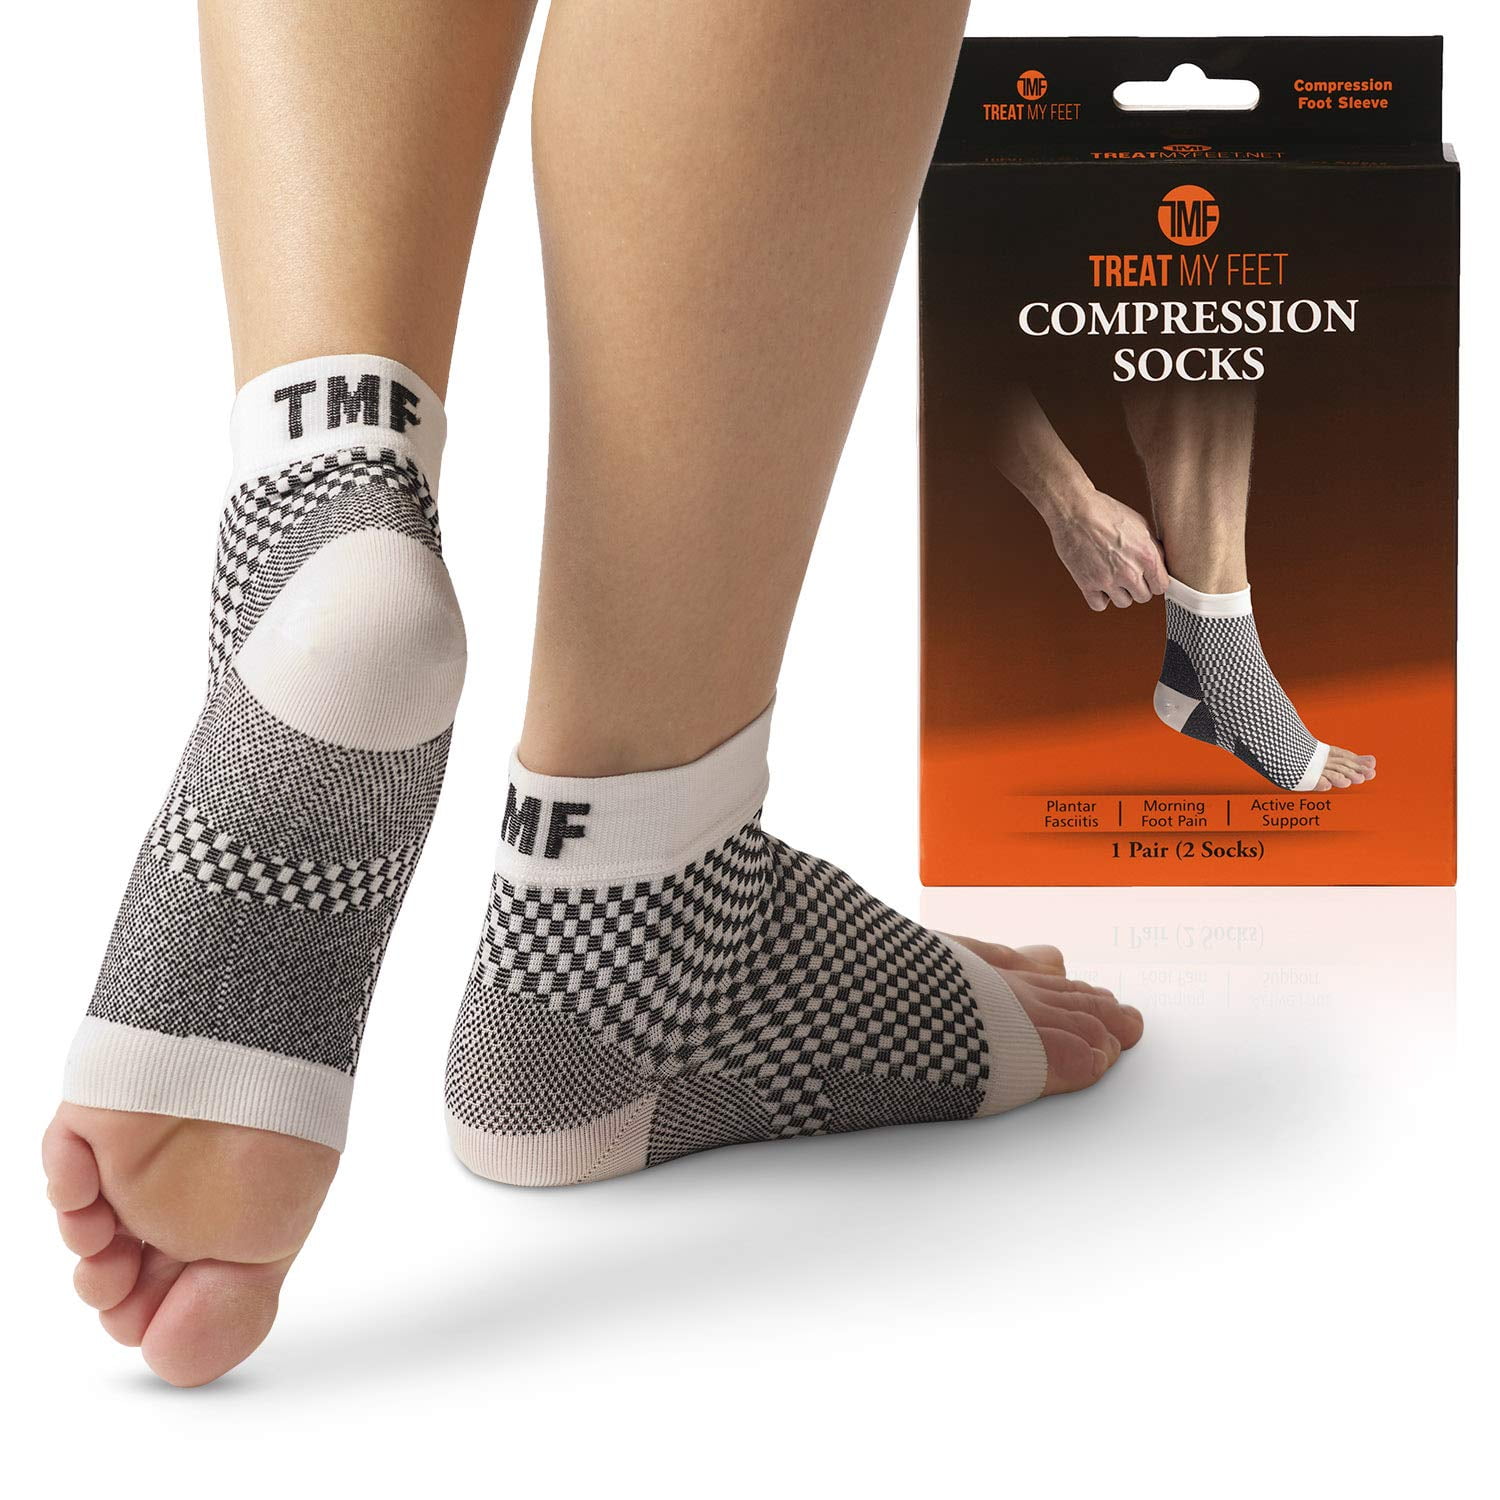 Plantar Fasciitis Support & Ankle Compression Socks For Feet:  FDA-Registered Stocking For Heel, Arch Support - Edema Relief Orthopedic  Socks For Men & Women Great Fit Guaranteed By Treat My Feet 